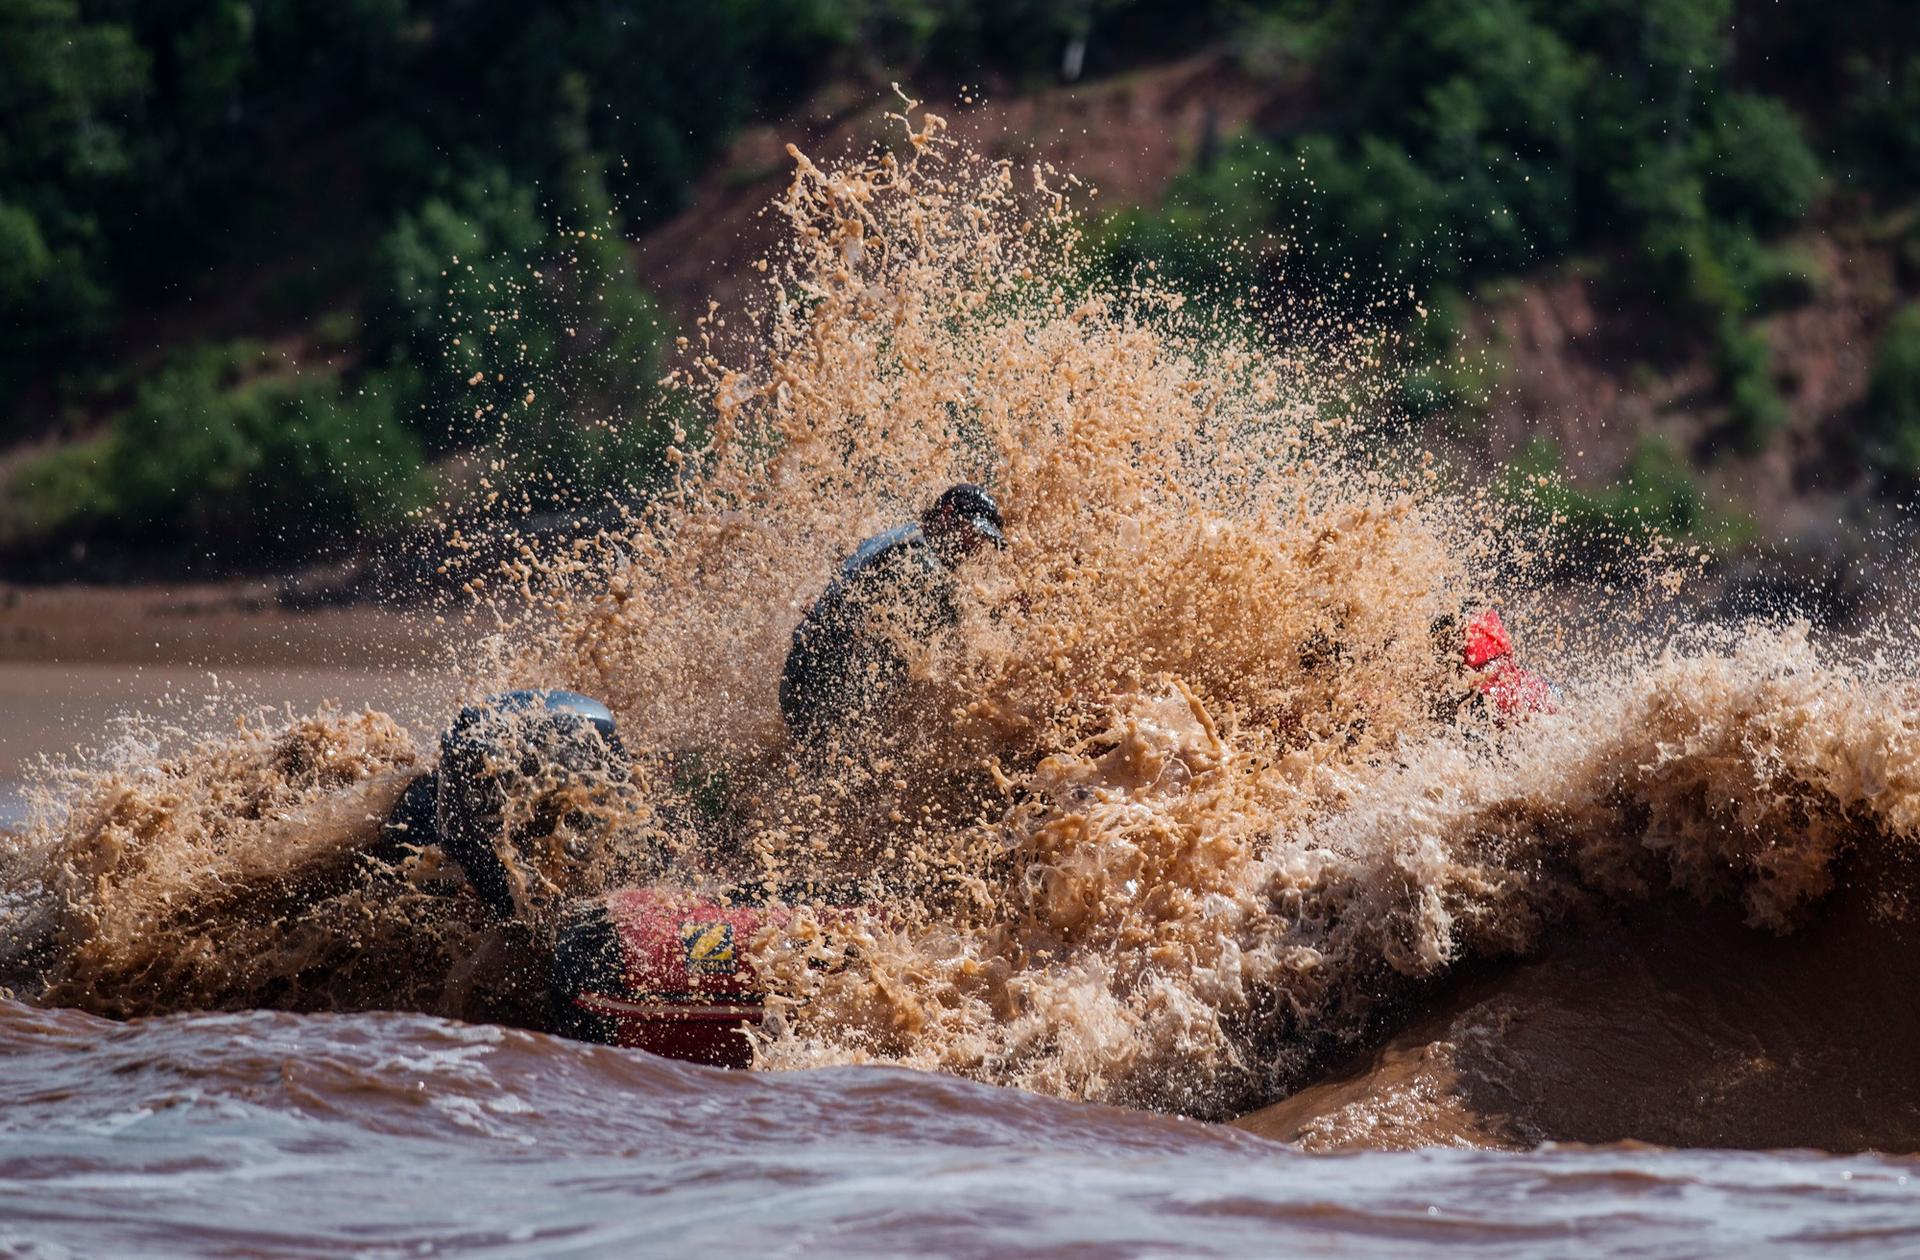 Tidal bore rafting the Shubenacadie River, Vacations of the Brave.